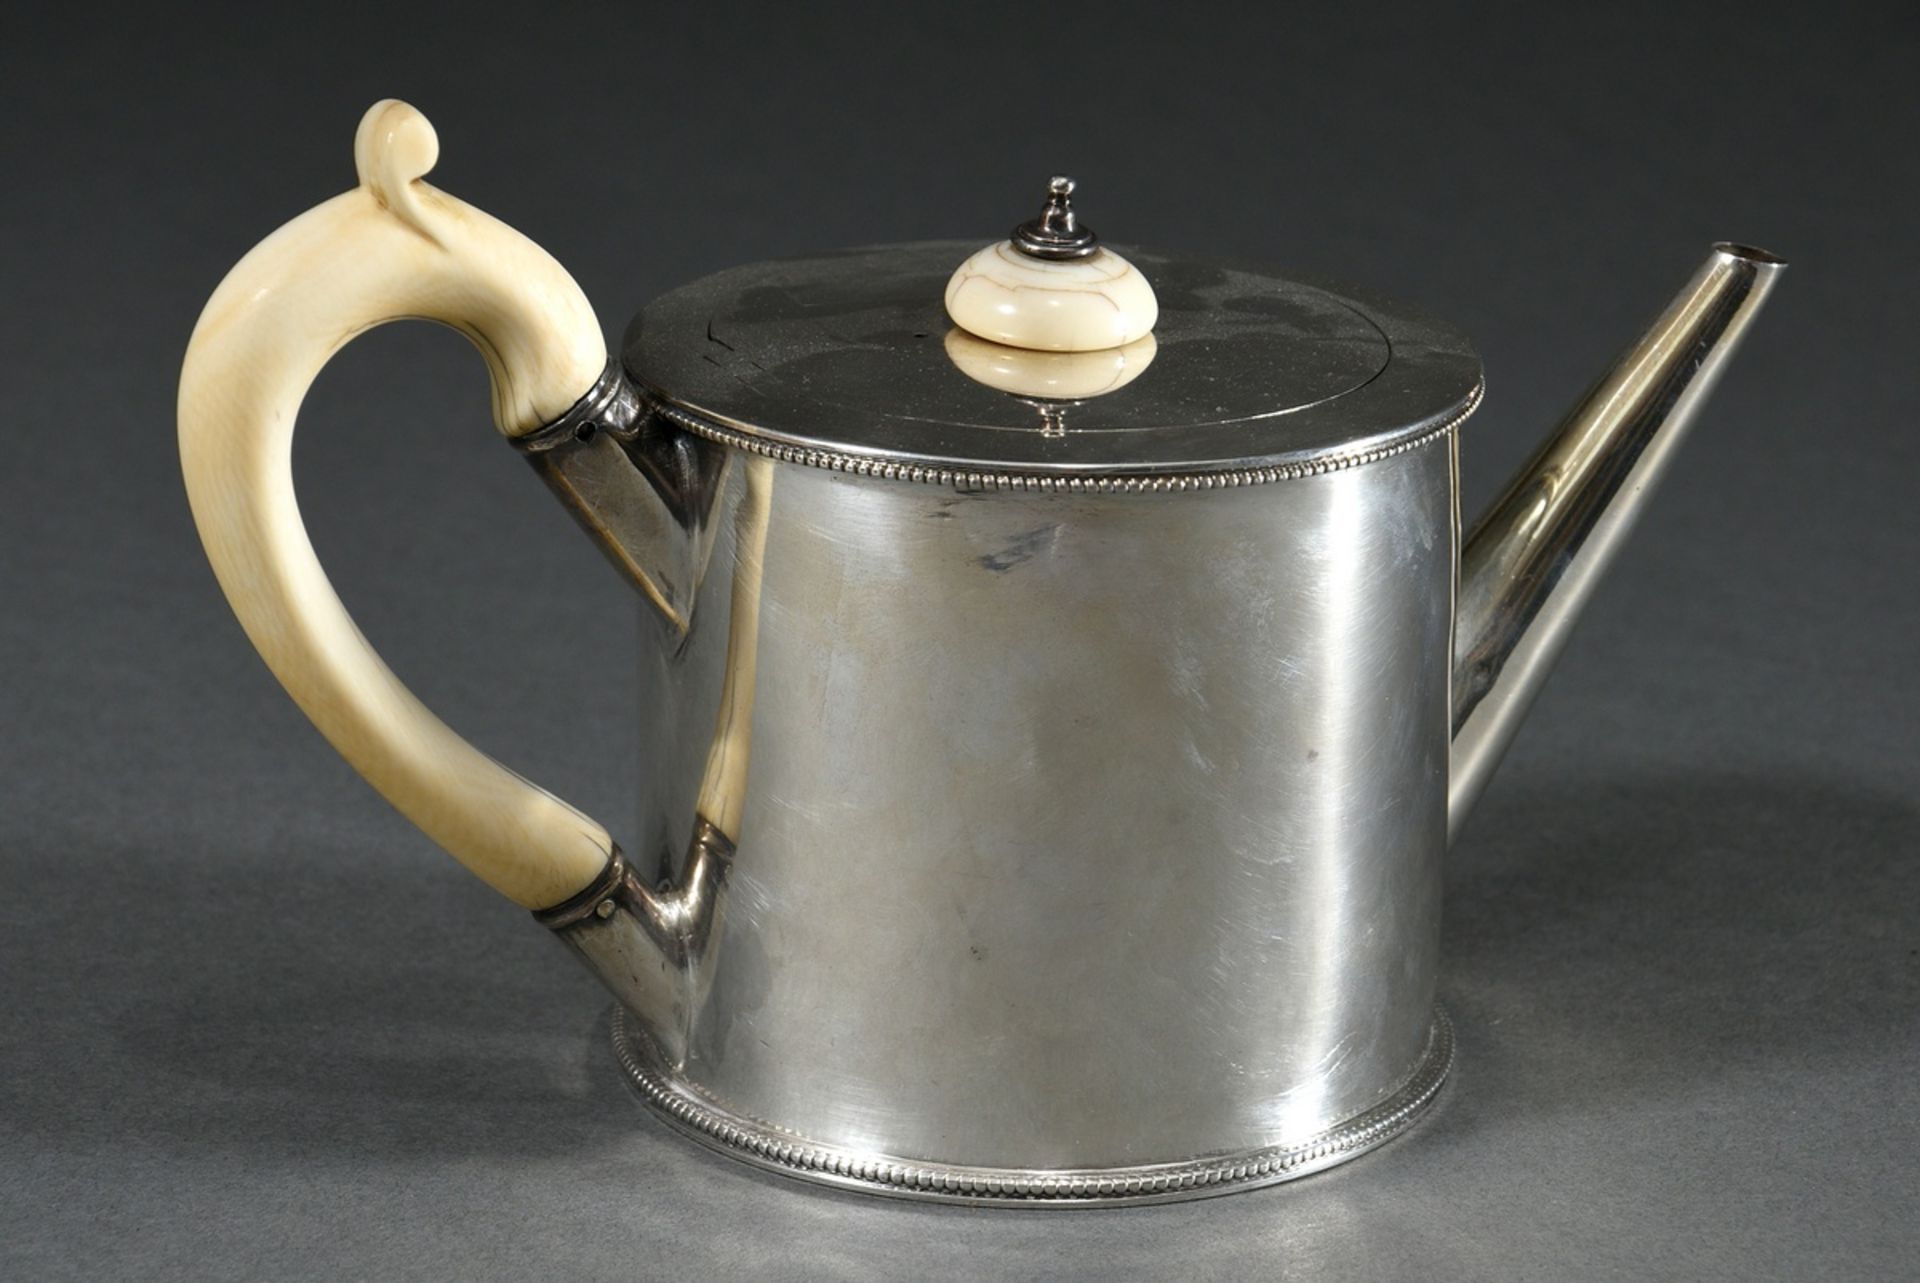 Cylindrical teapot with pearl frieze, ivory handle and lid knob, London 1804, uninterpreted maker's - Image 2 of 5